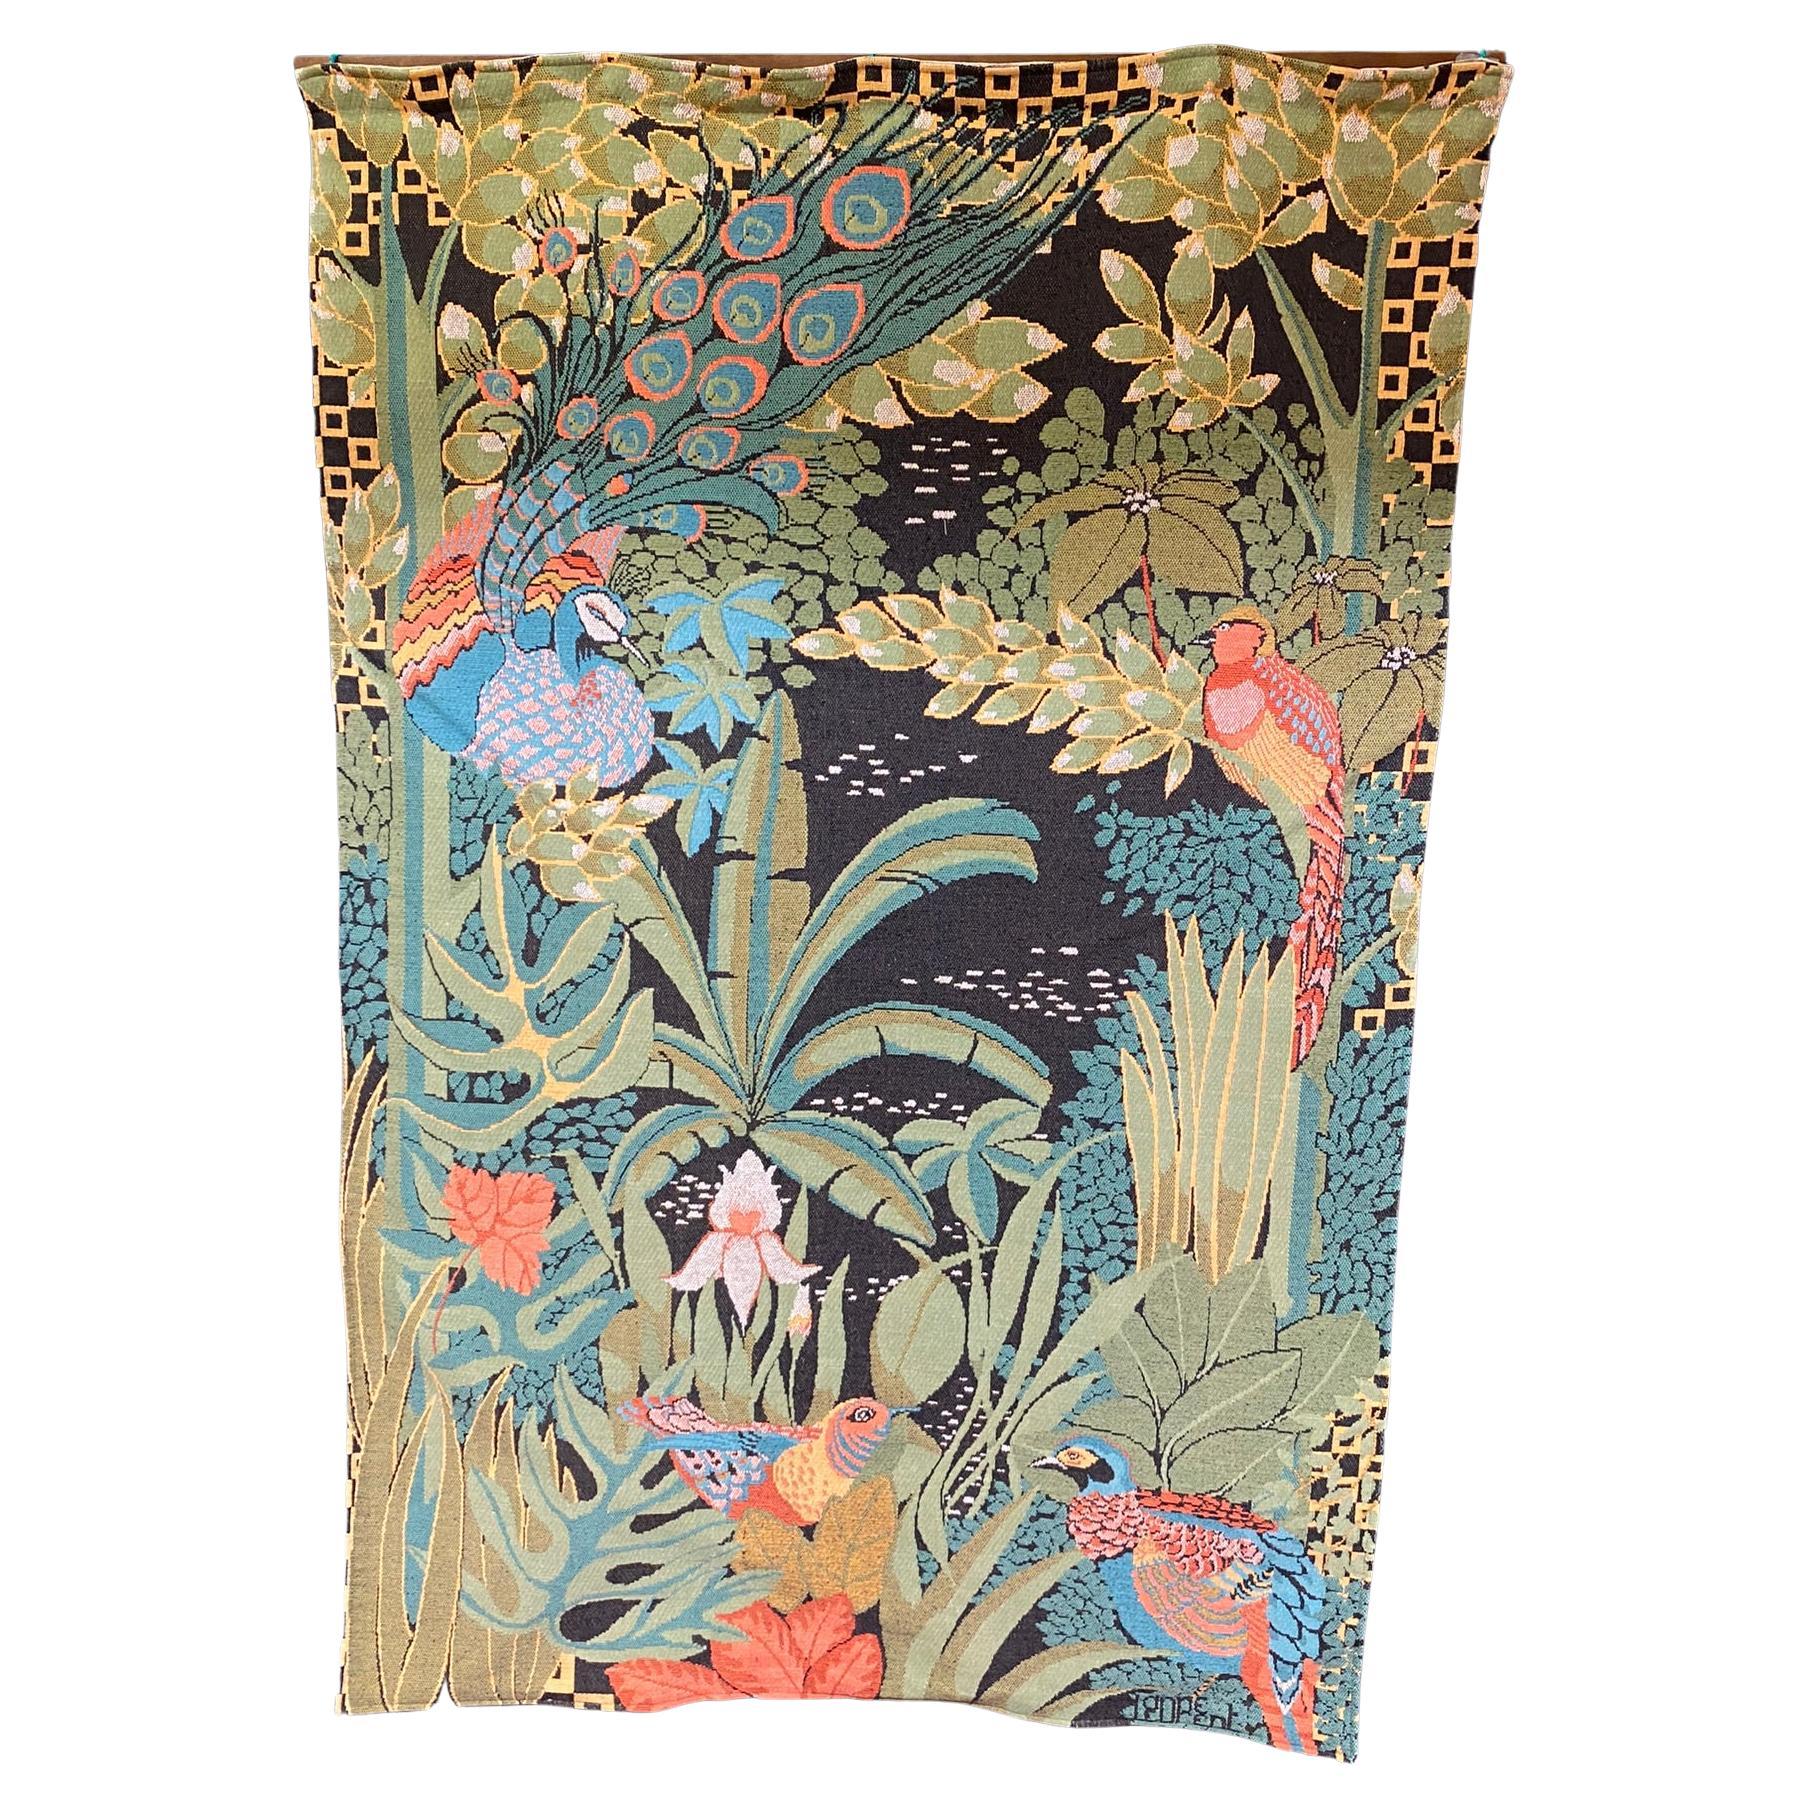 Anne Leurent (from a drawing of) "the jungle" mechanical tapestry, circa 1970